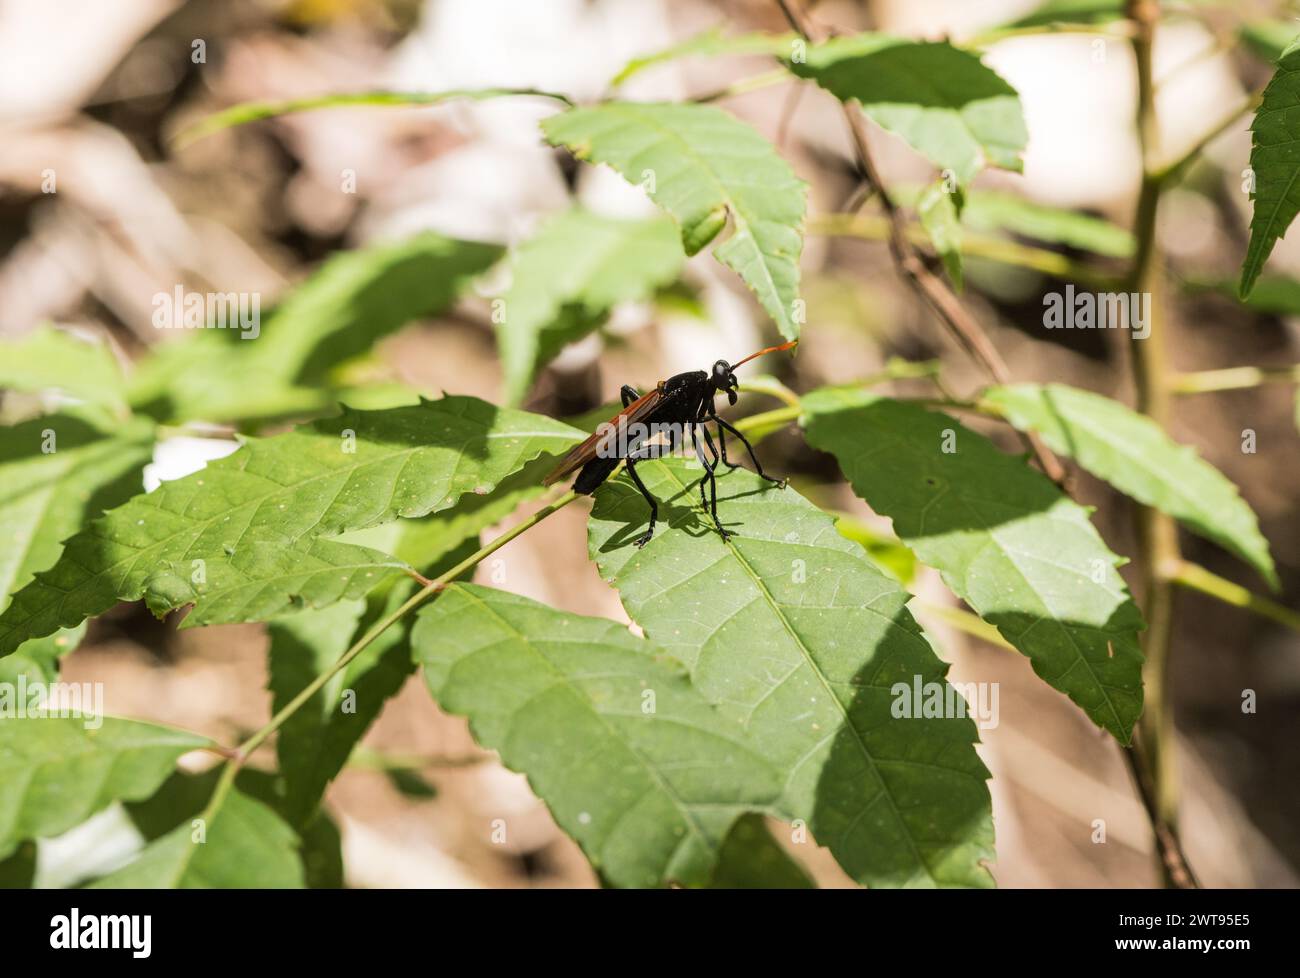 A Mydas Fly (Protomydas rubidapex), a spider-hunting wasp mimic, perched on a leaf in Colombia.  One of the two species recorded for the country. Stock Photo